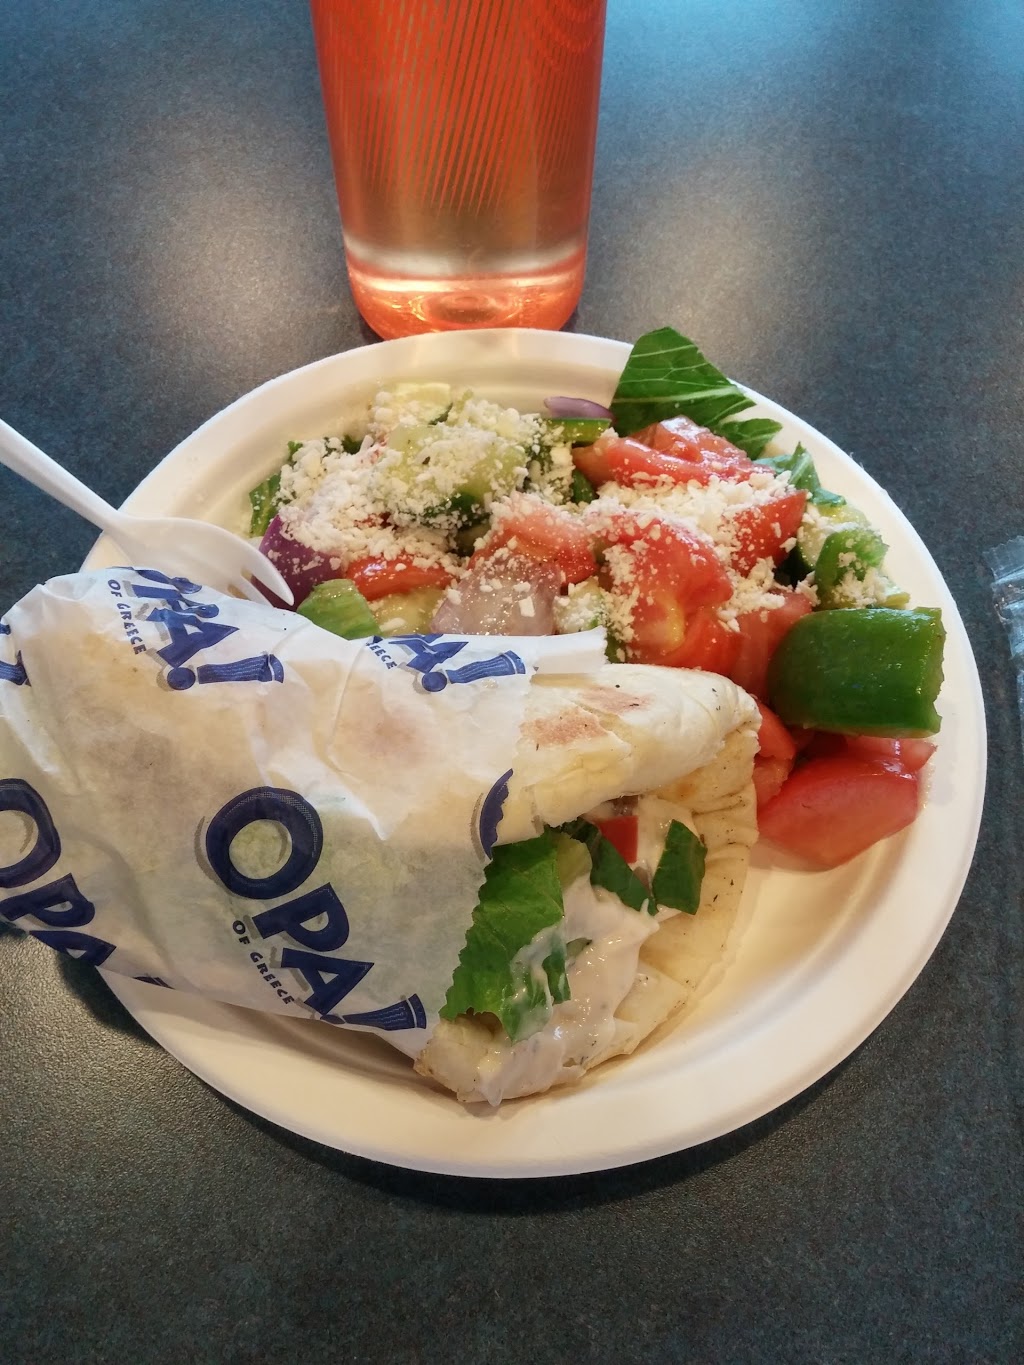 OPA! of Greece Emerald Hills | 5000 Emerald Dr #210, Sherwood Park, AB T8H 0P5, Canada | Phone: (780) 417-8826